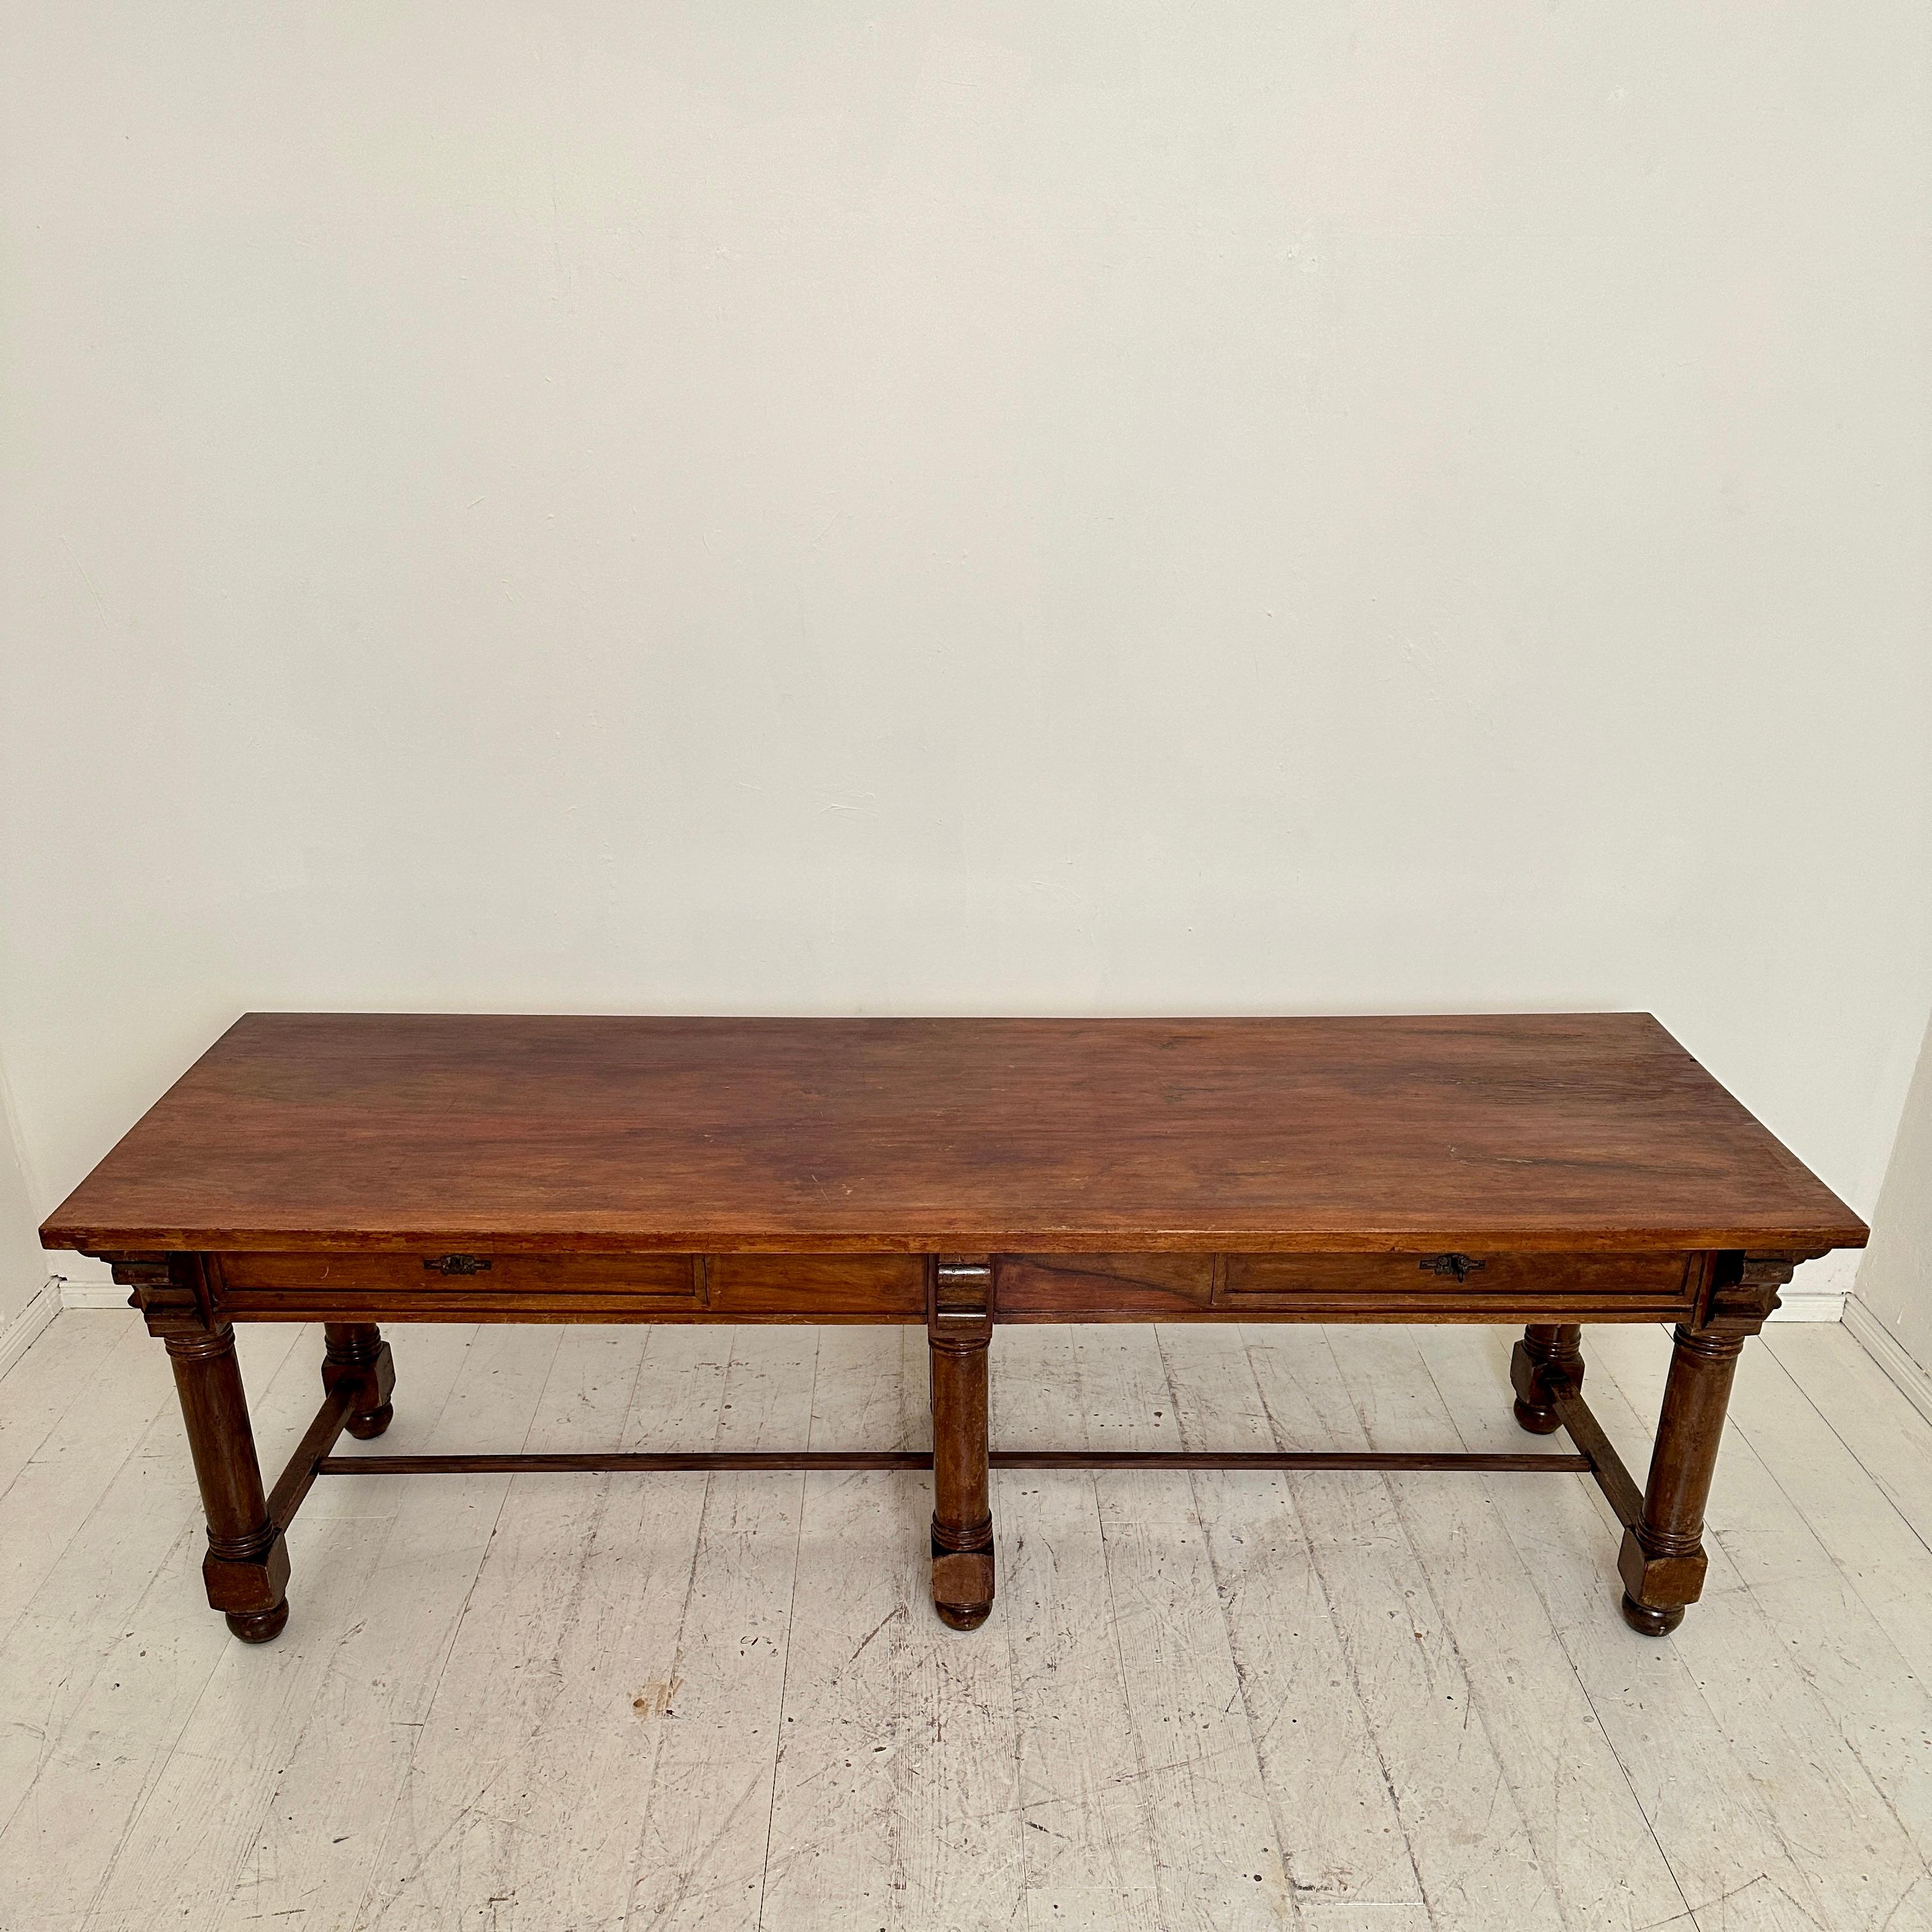 Late 19th Century Italian Large Brown Walnut Dining Table with 2 Drawers, 1880 For Sale 1